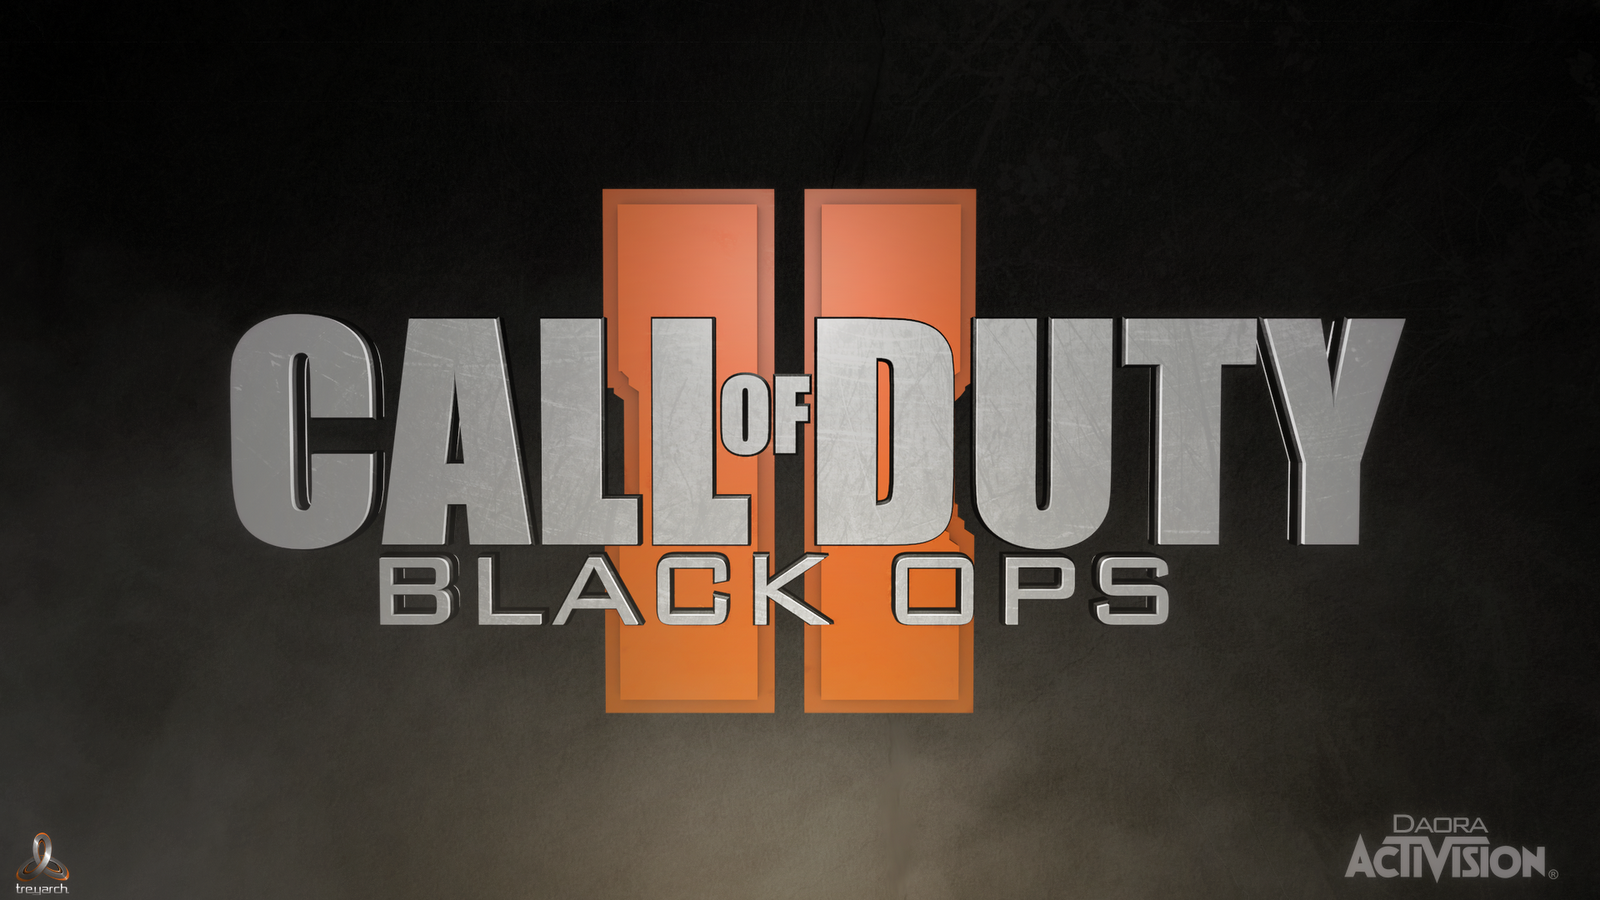 HD WALLPAPERS Call of Duty Black ops 2 HD Wallpapers 1600x900